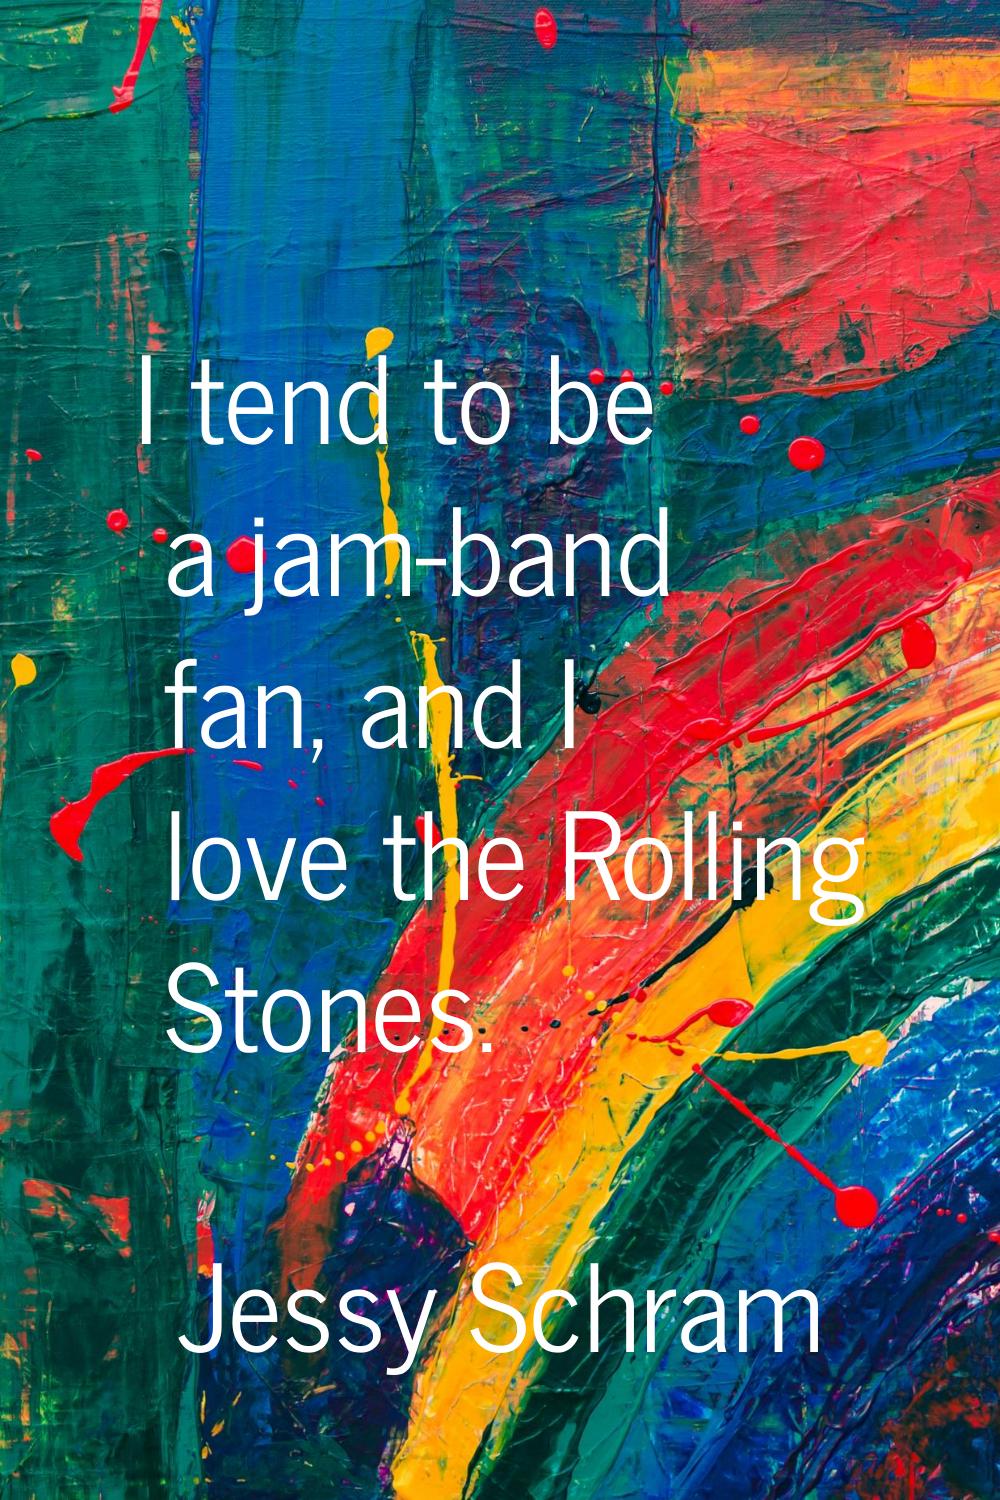 I tend to be a jam-band fan, and I love the Rolling Stones.